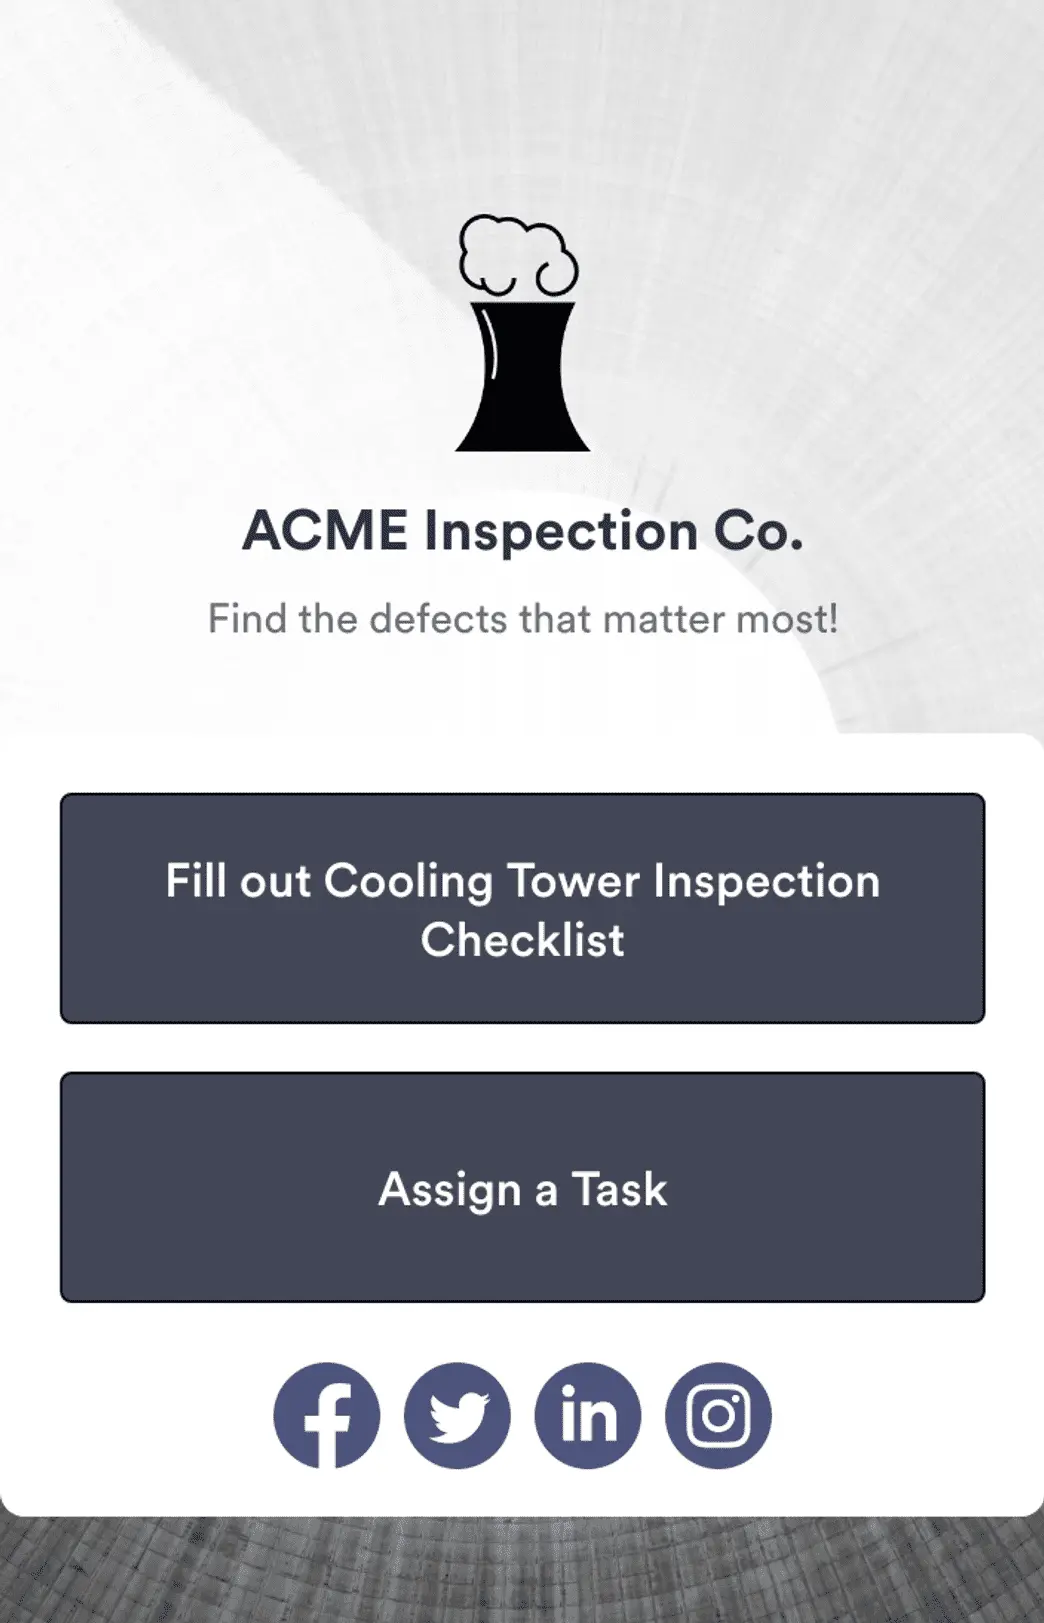 Cooling Tower Inspection Checklist App